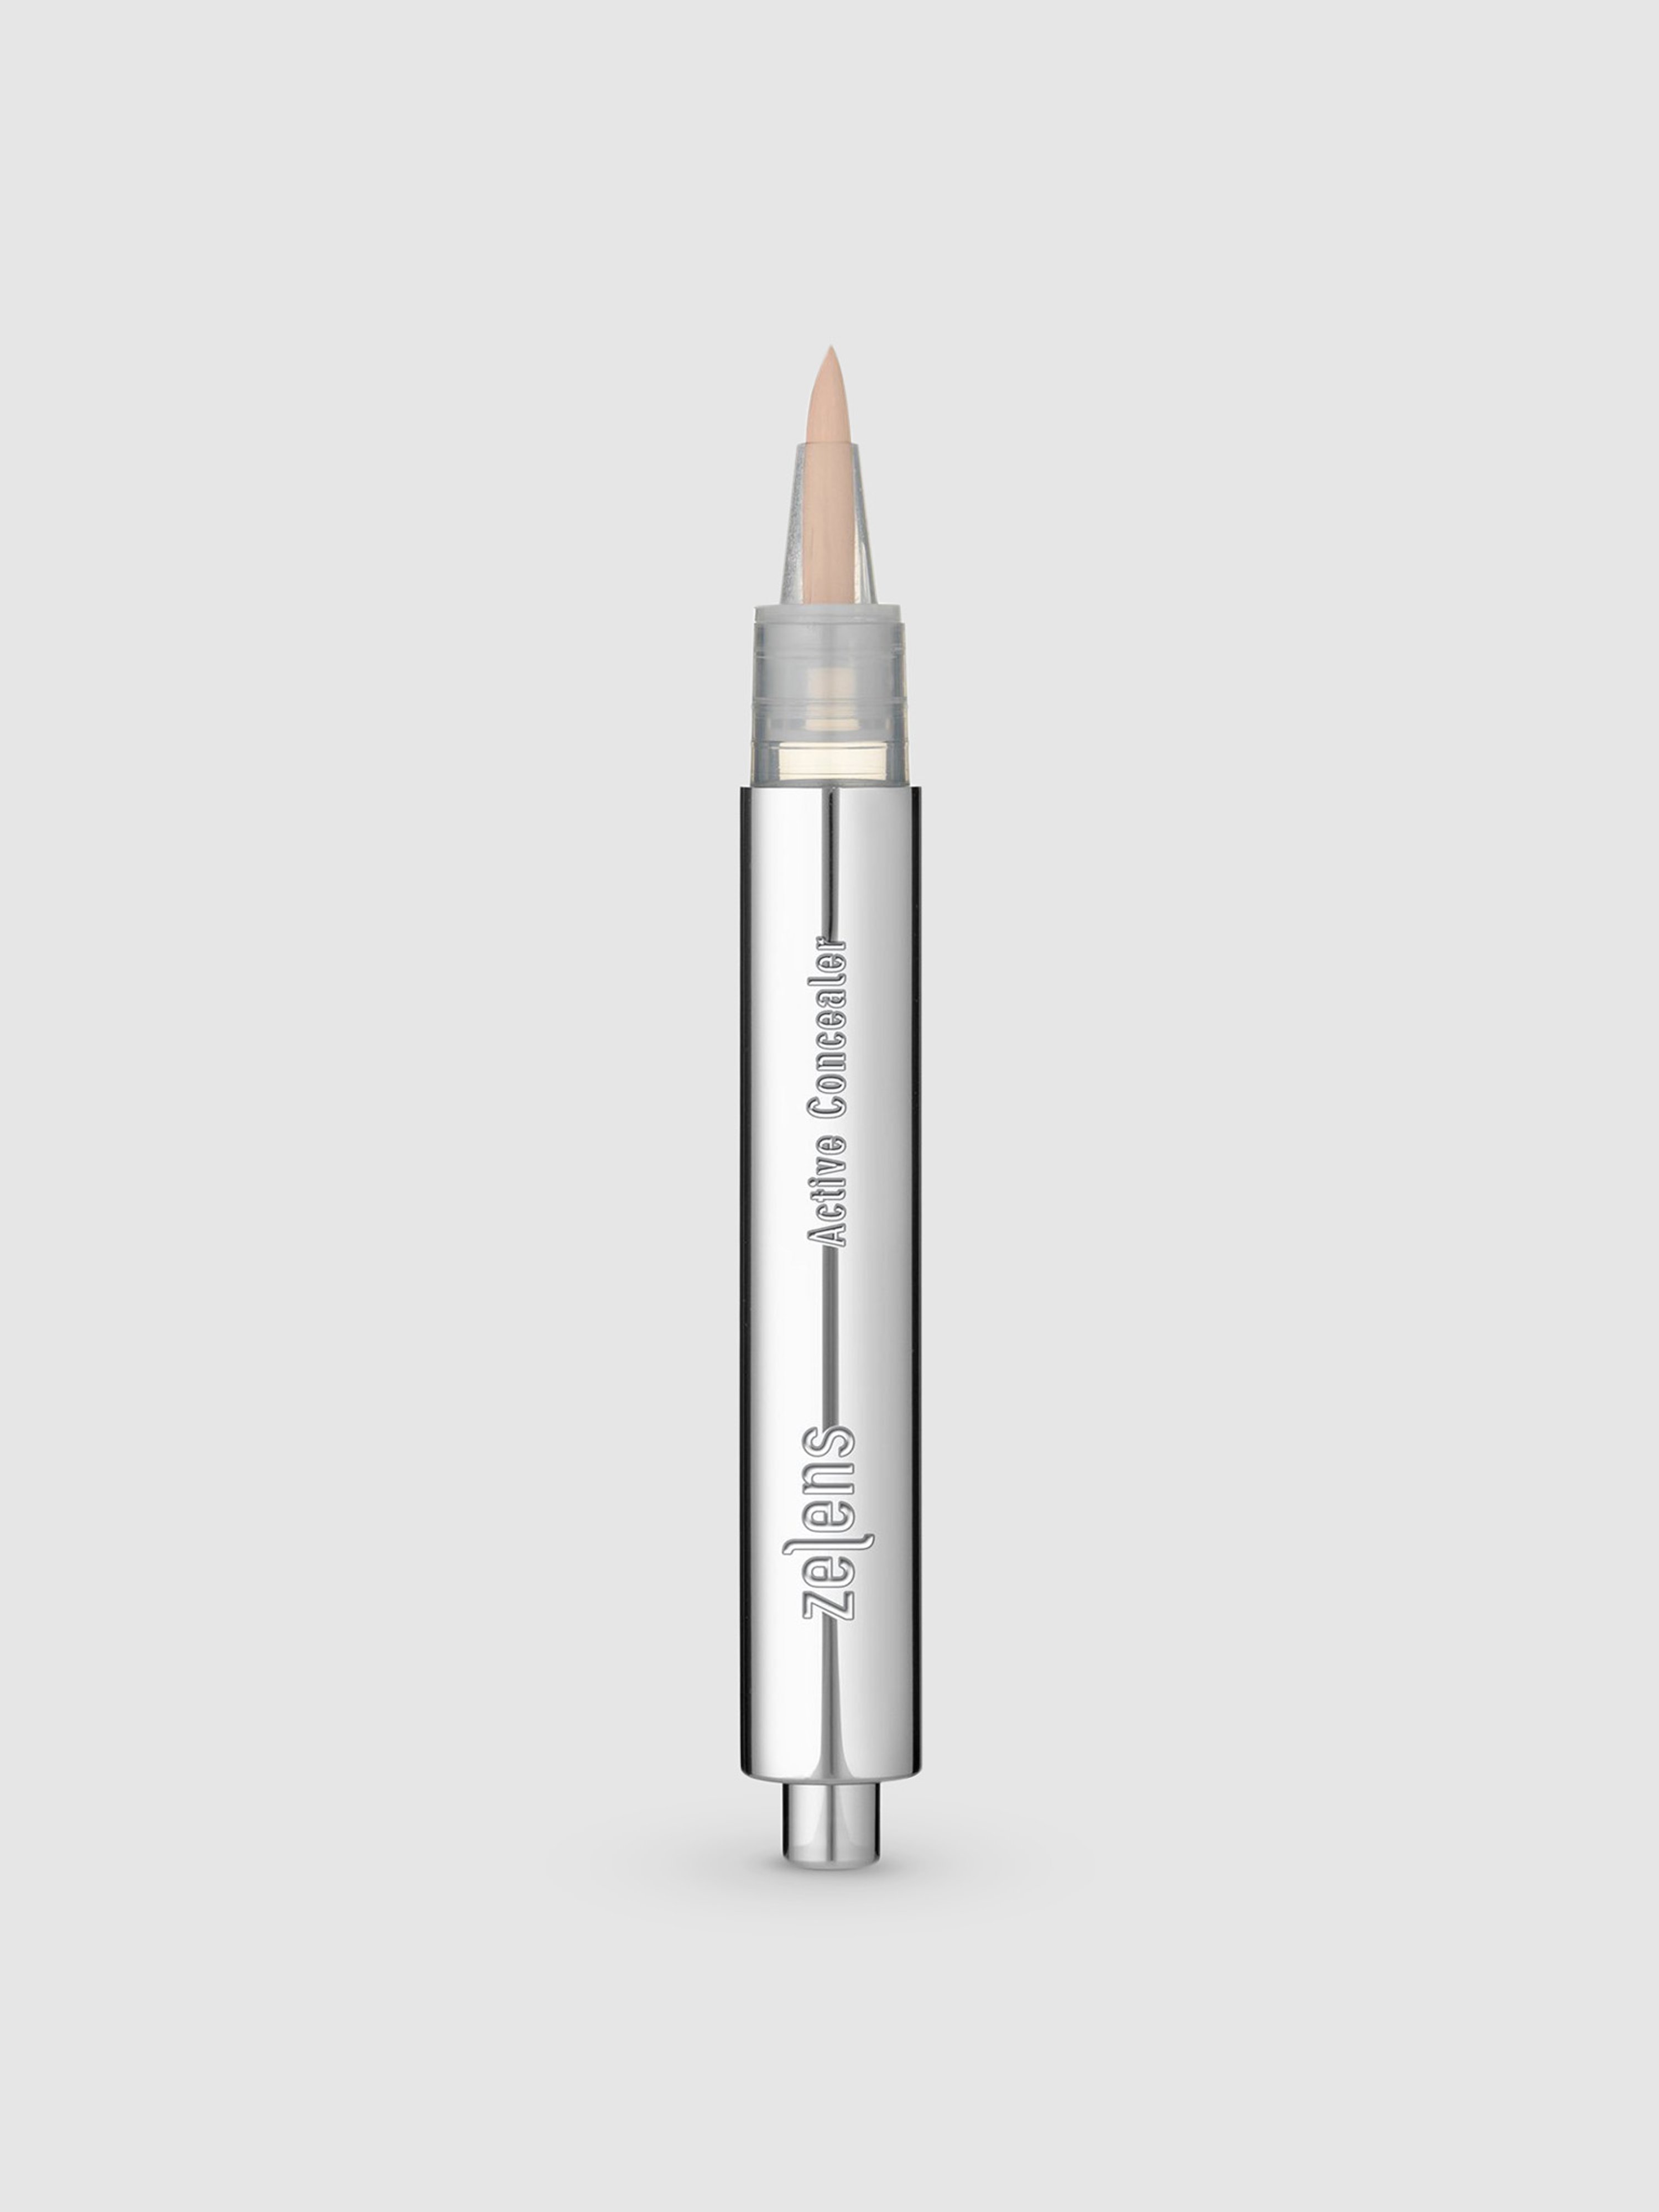 MATERIAE BY DAVID PIRROTTA ZELENS ACTIVE CONCEALER